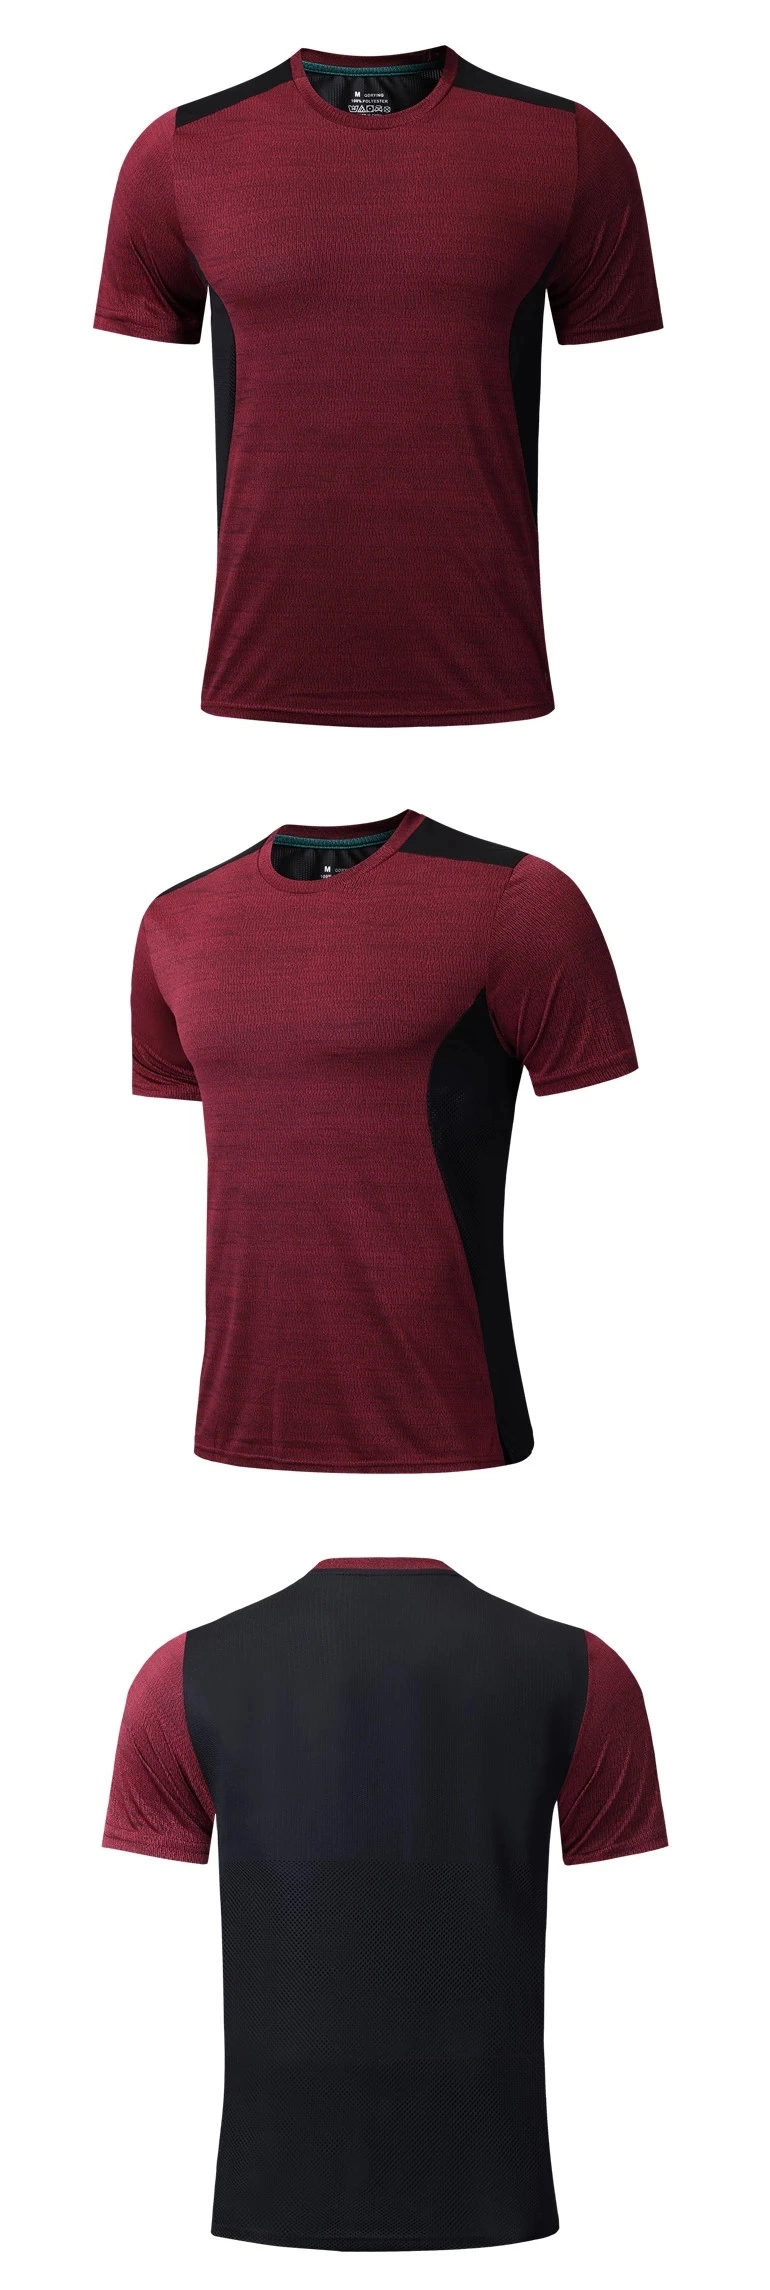 Wholesales Clothing Quick Drying Slim Short Sleeve Sports Leisure Running Clothes Blank T-Shirt